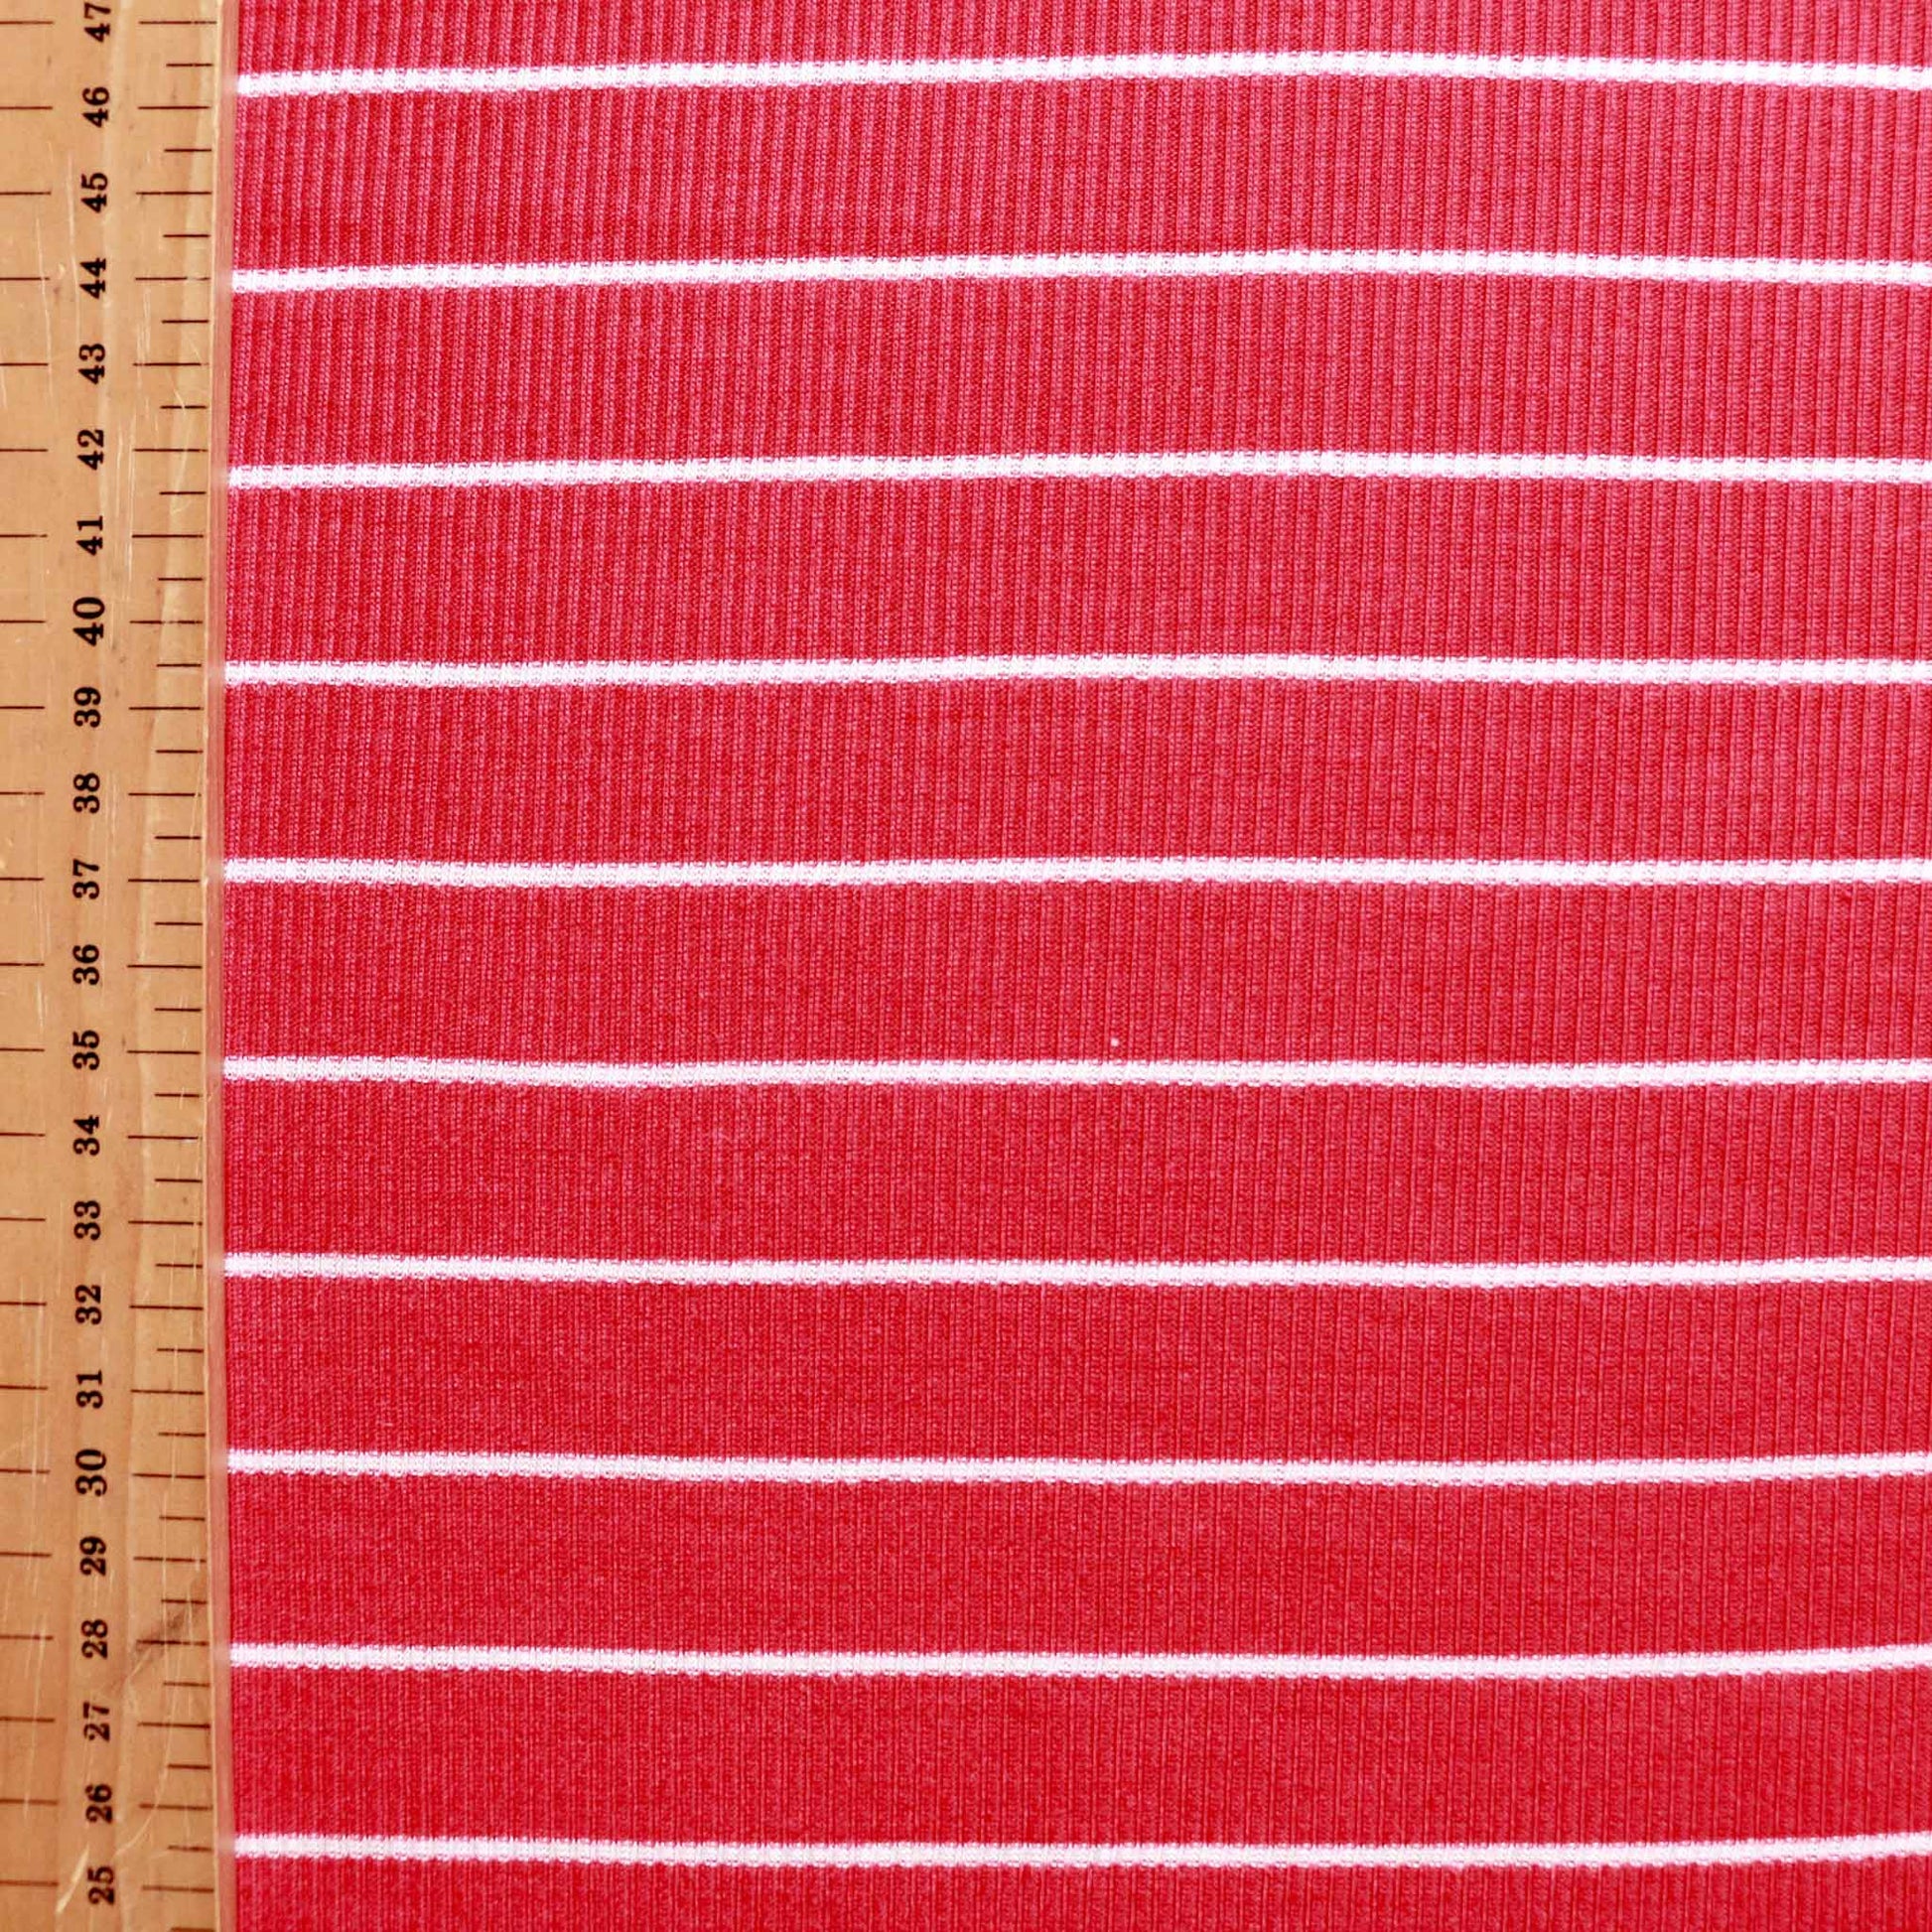 rib jersey knit stretchy viscose dressmaking fabric in red and white stripe